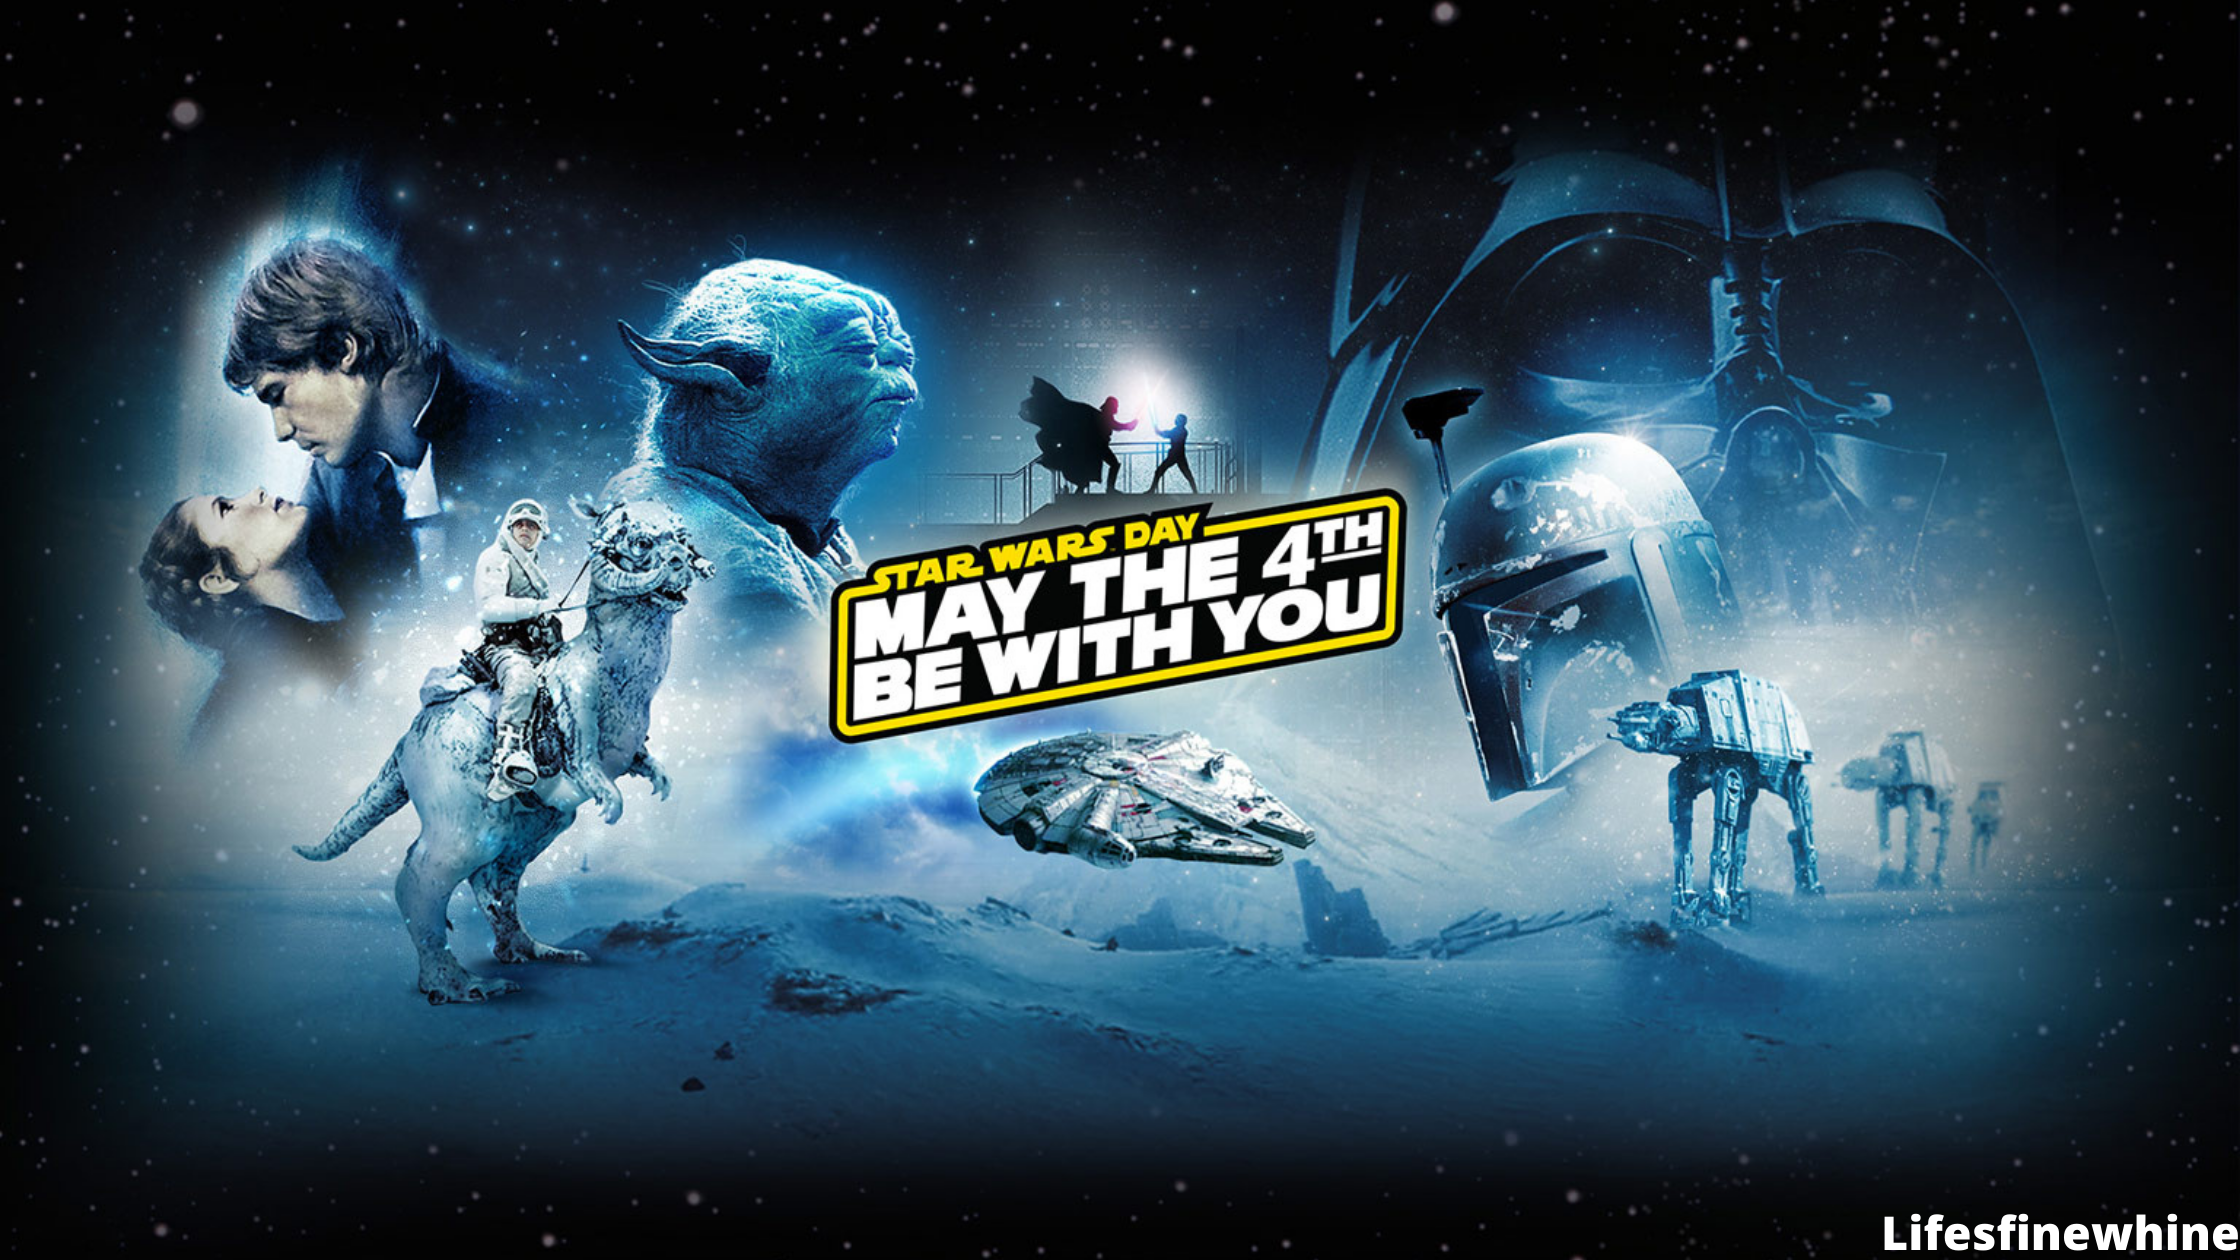 Have A Happy Star Wars Day!